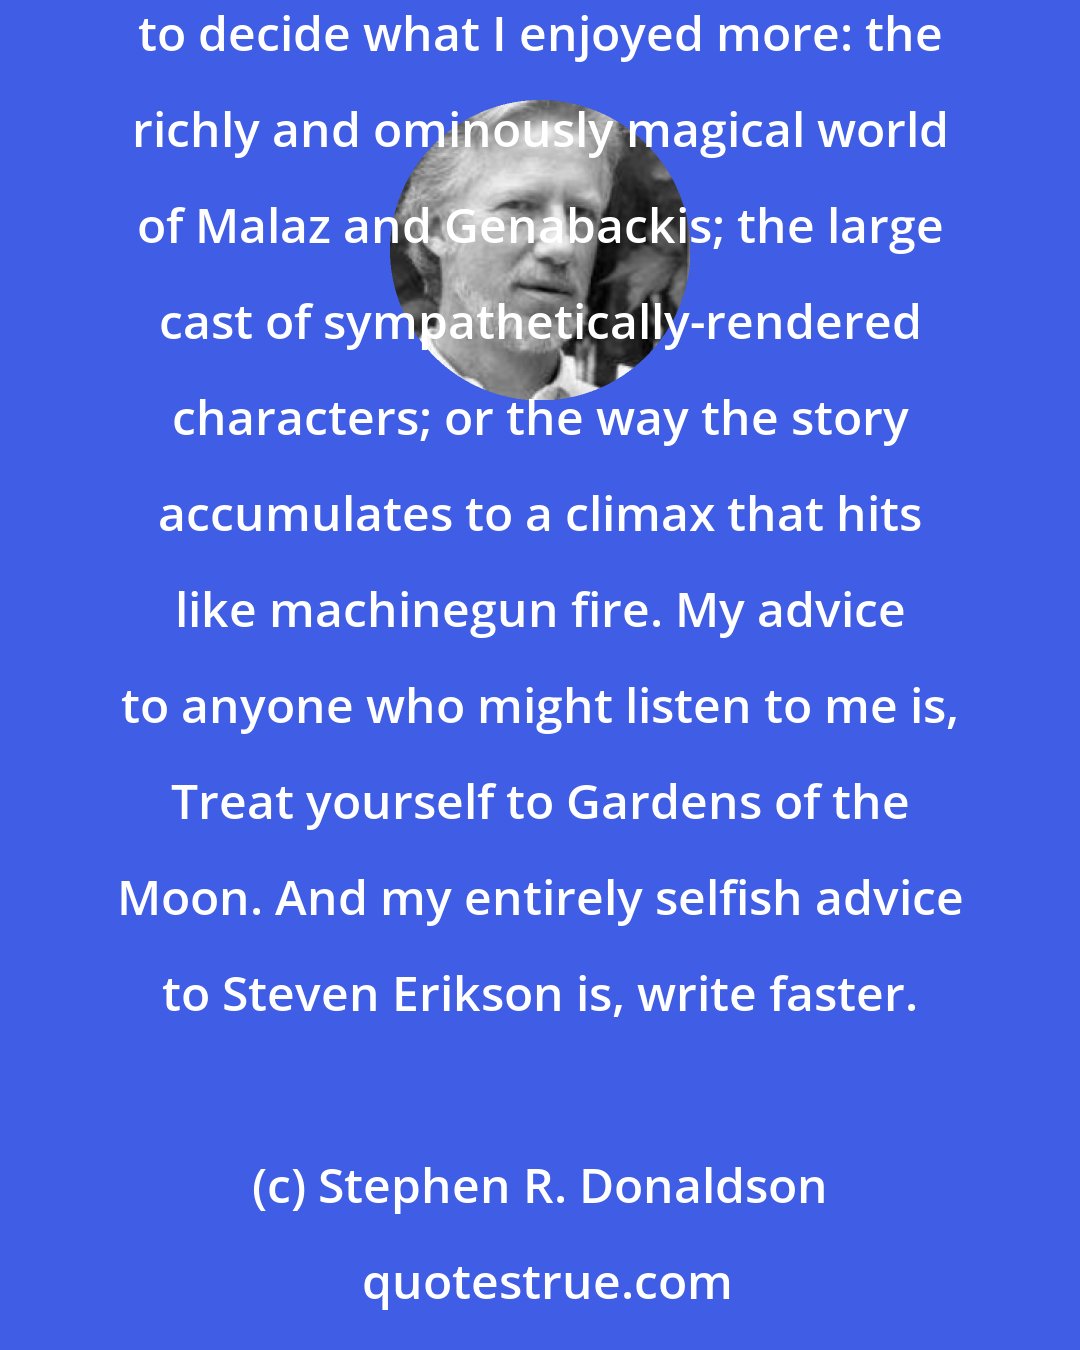 Stephen R. Donaldson: Steven Erikson is an extraordinary writer. I read Gardens of the Moon with great pleasure. And now that I have read it, I would be hard pressed to decide what I enjoyed more: the richly and ominously magical world of Malaz and Genabackis; the large cast of sympathetically-rendered characters; or the way the story accumulates to a climax that hits like machinegun fire. My advice to anyone who might listen to me is, Treat yourself to Gardens of the Moon. And my entirely selfish advice to Steven Erikson is, write faster.